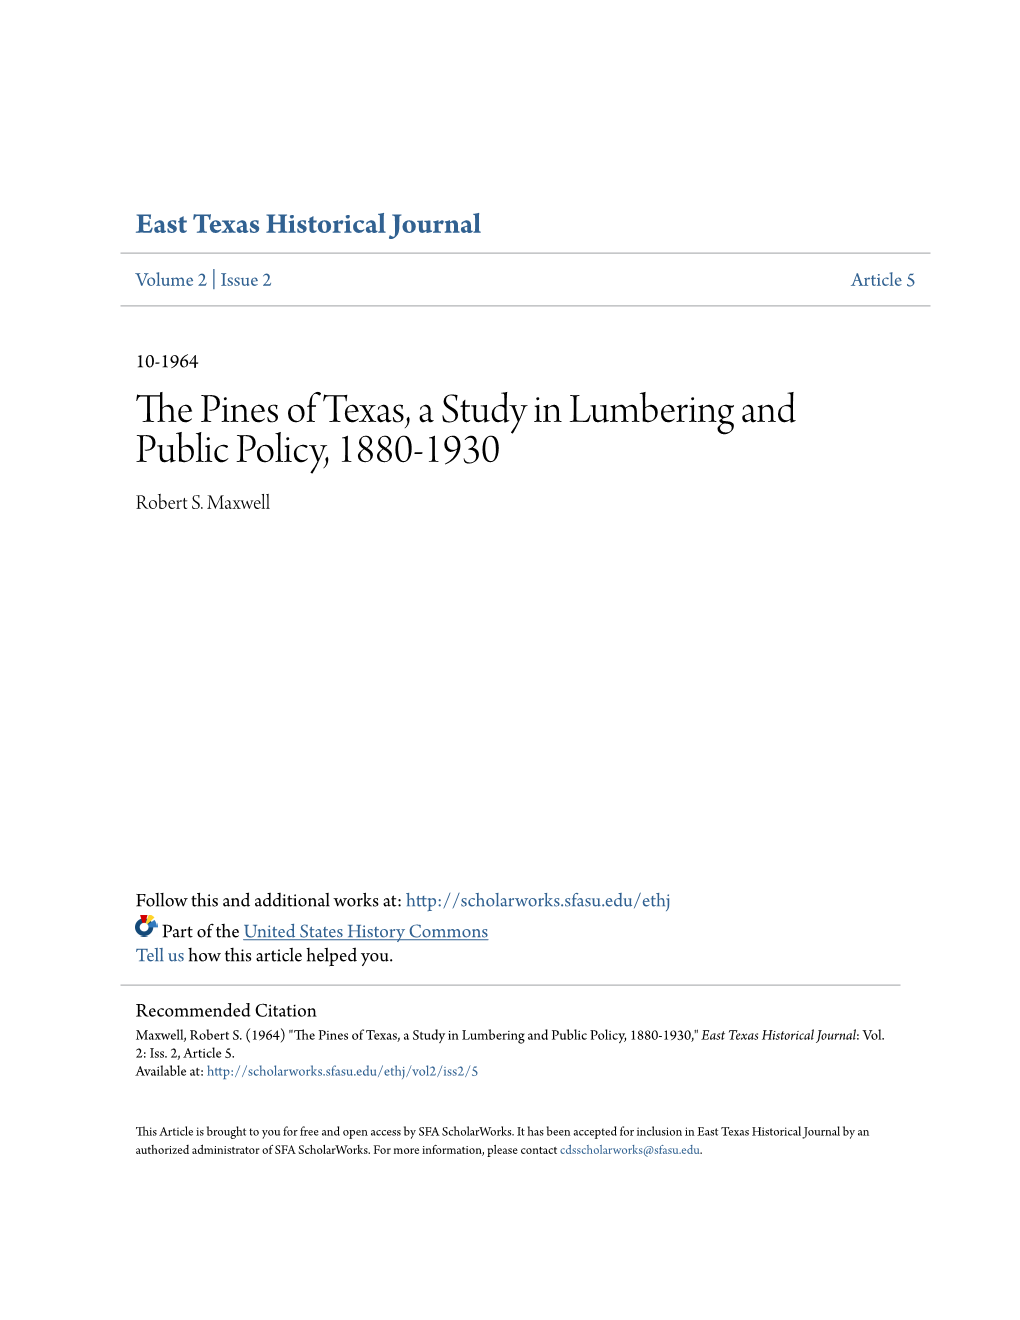 The Pines of Texas, a Study in Lumbering and Public Policy, 1880